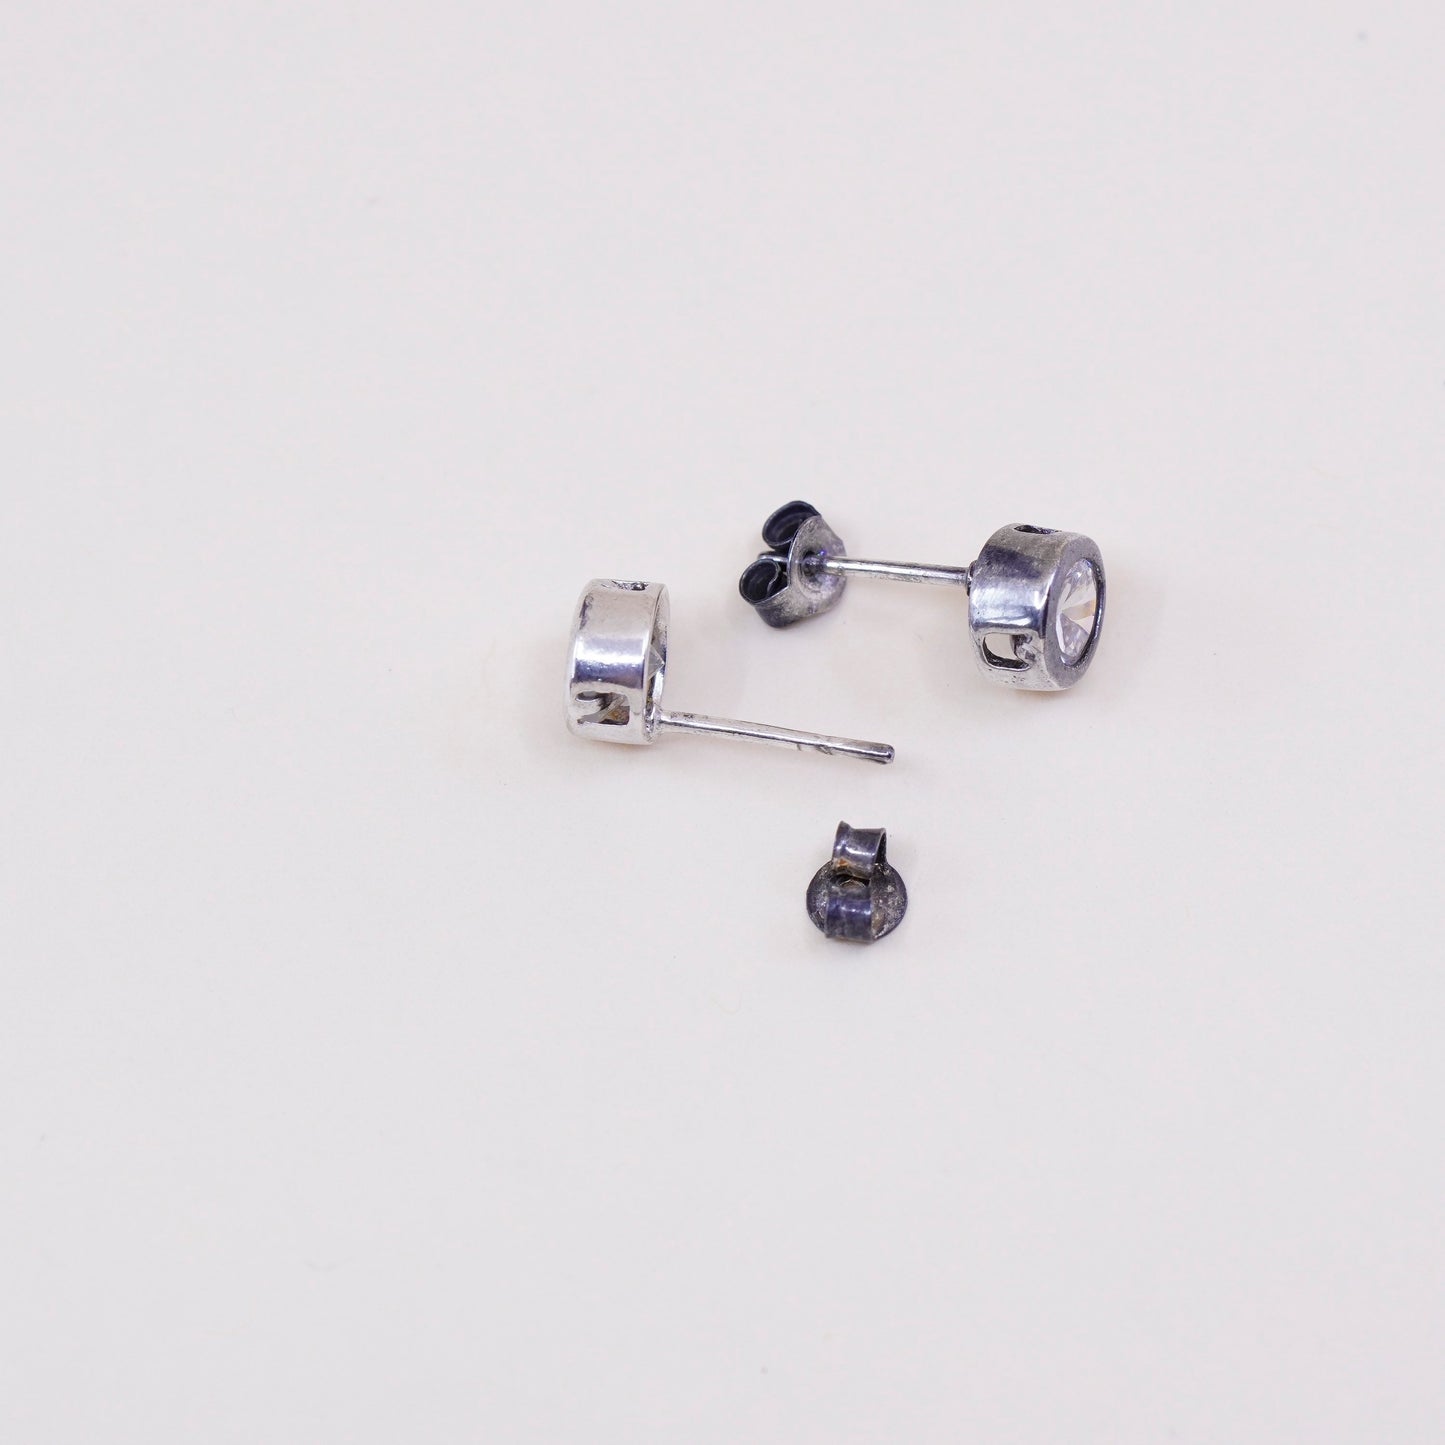 Vintage sterling silver square clear CZ studs, earrings